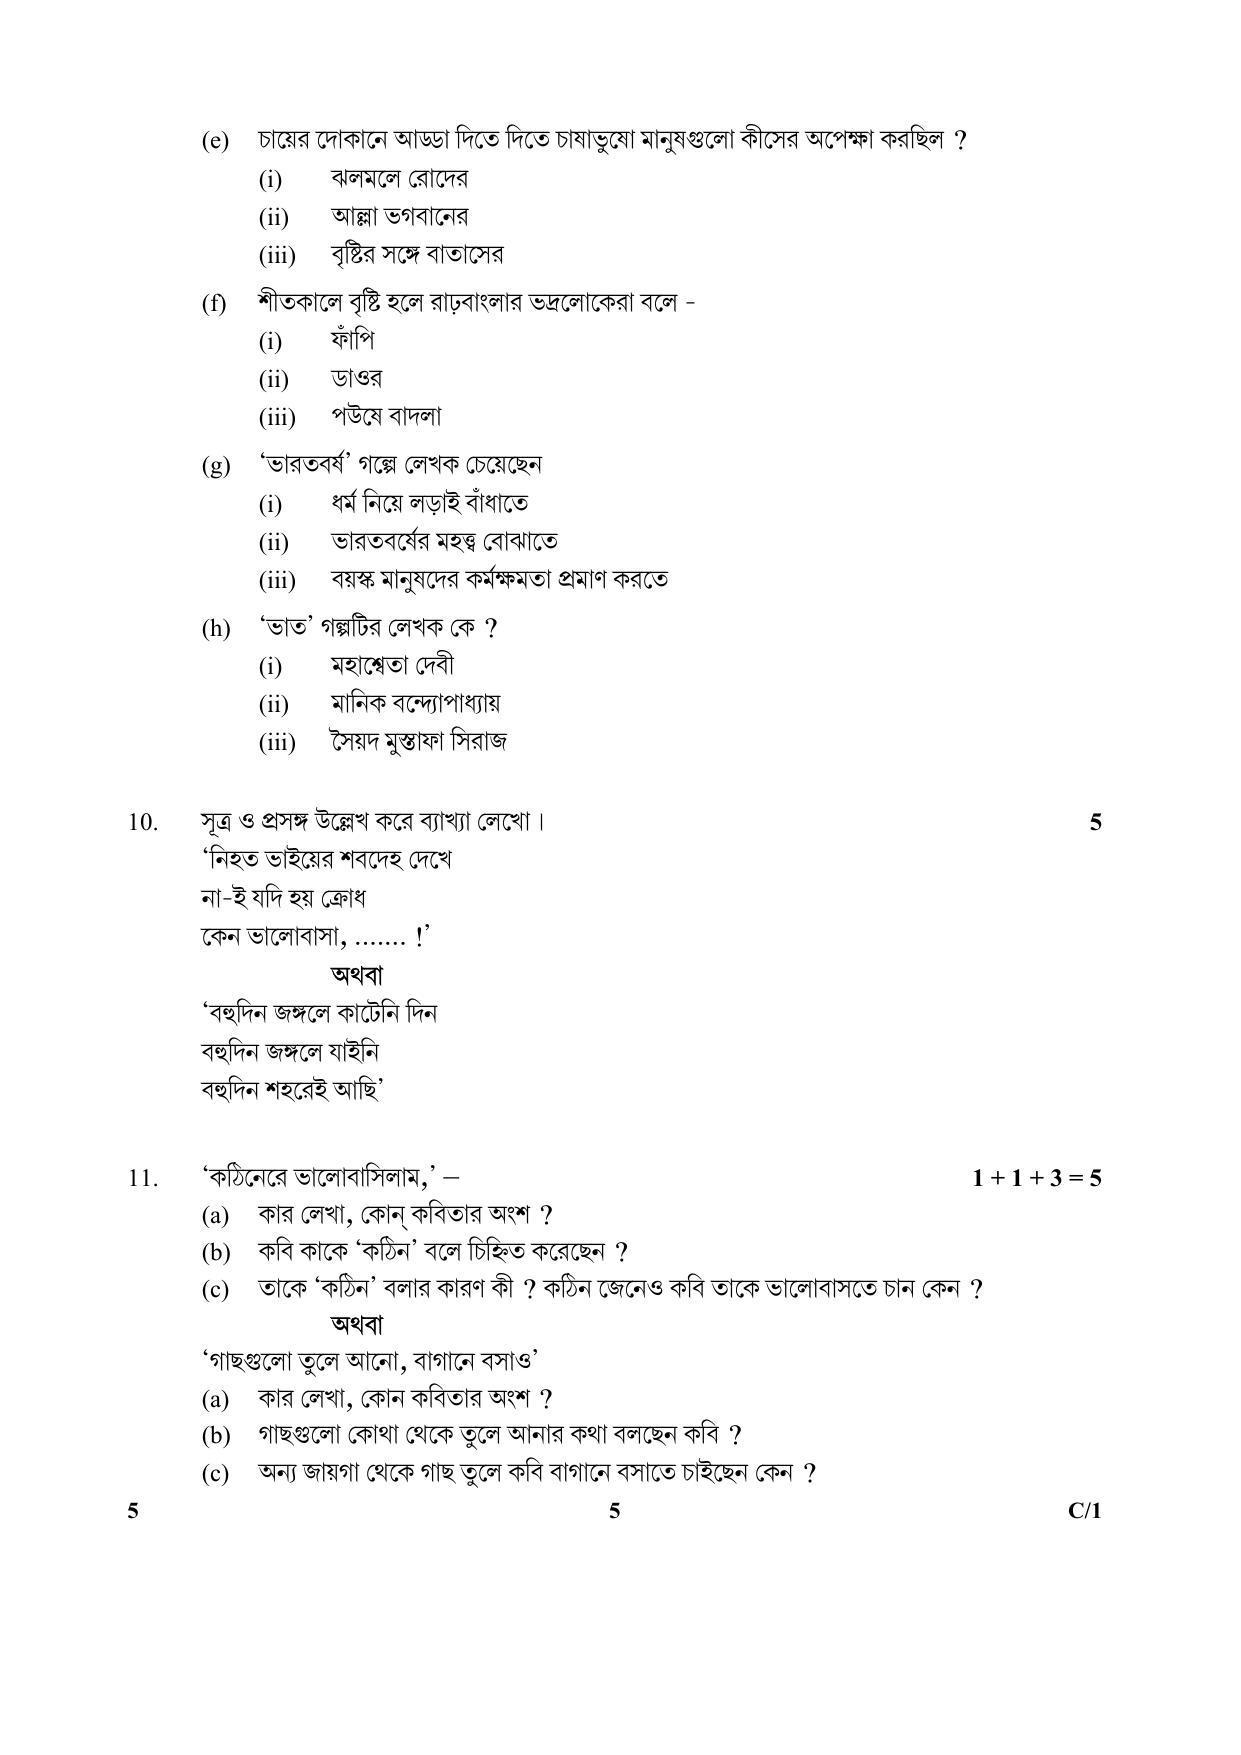 CBSE Class 12 5 (Bengali) 2018 Compartment Question Paper - Page 5